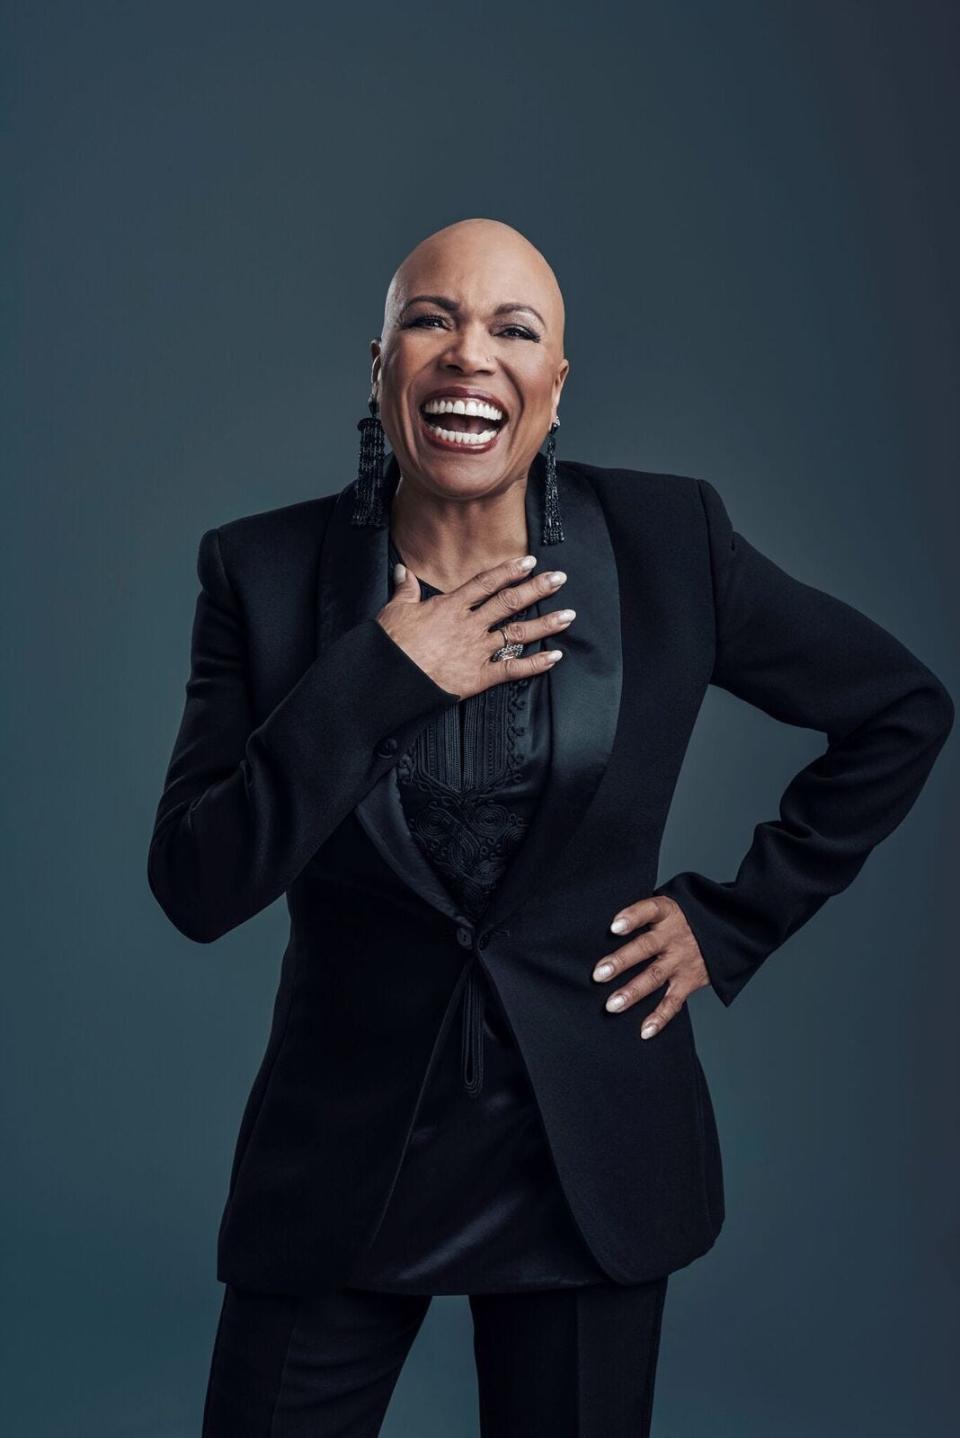 Jazz vocalist Dee Dee Bridgewater will perform with an ensemble of musicians in celebration of the Monterey Jazz Festival at the McCallum Theatre in Palm Desert, Calif., on Jan. 19, 2023.